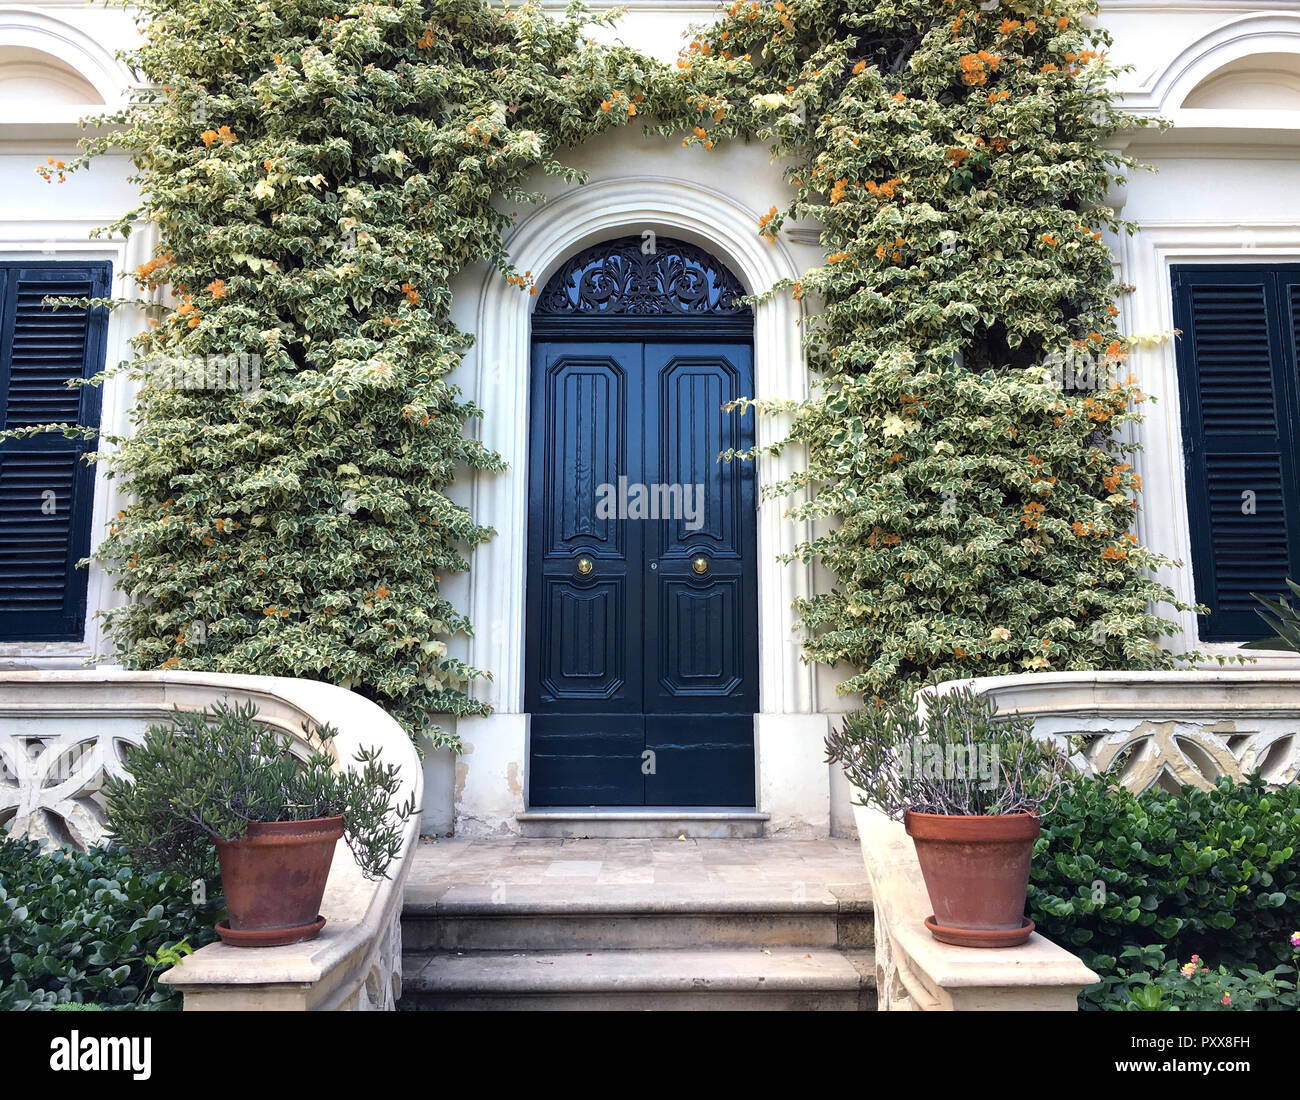 View of a Beautiful House Exterior and Front Door Seen. There are windows on either side of the door, plants on the wall. Horizontal shot Stock Photo